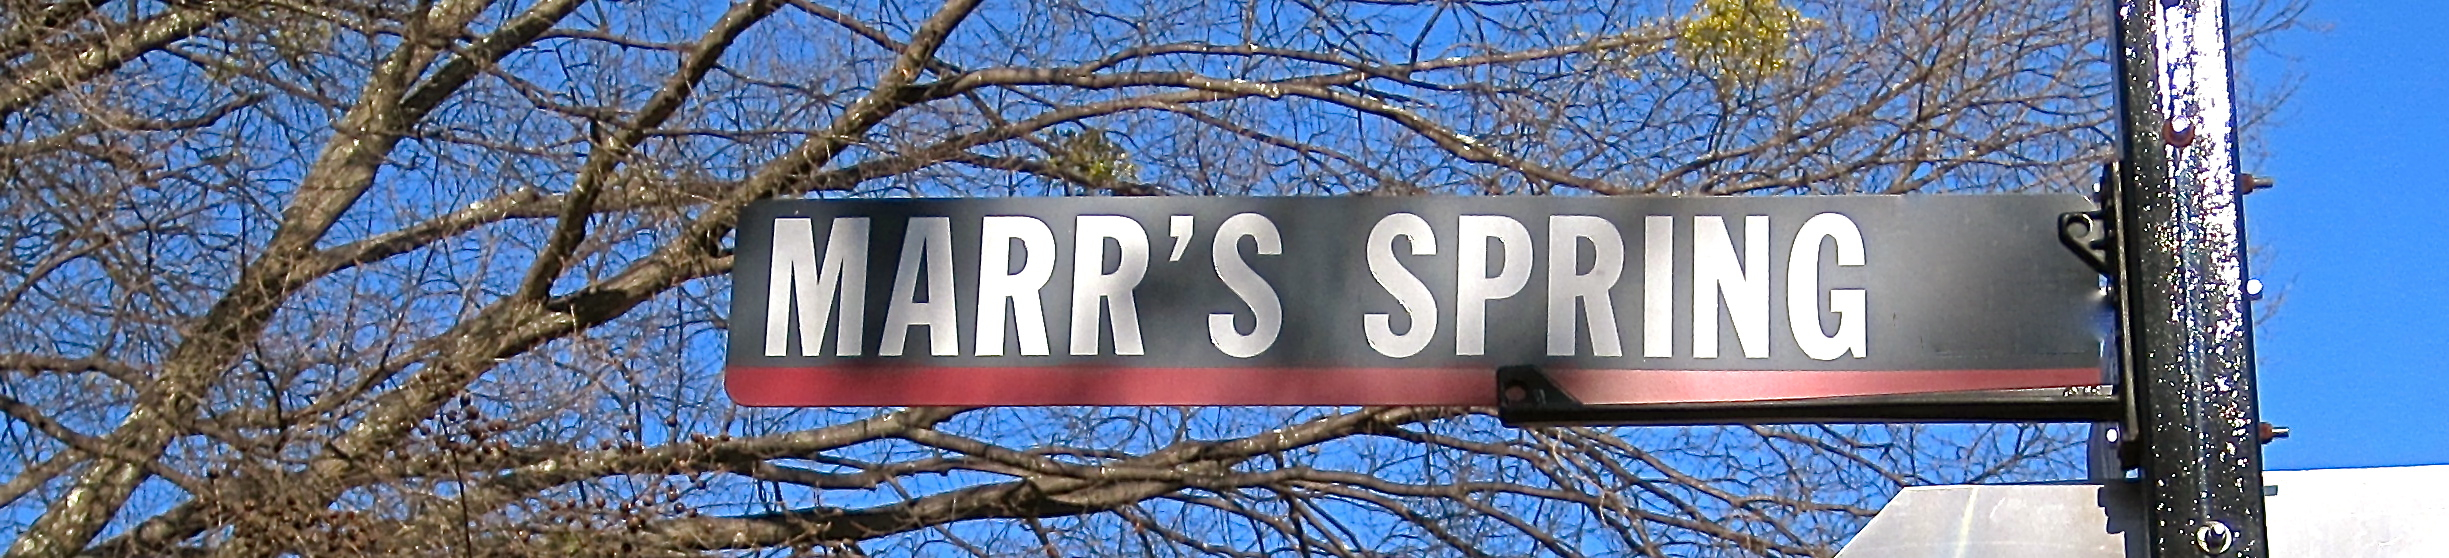 Marr's Spring